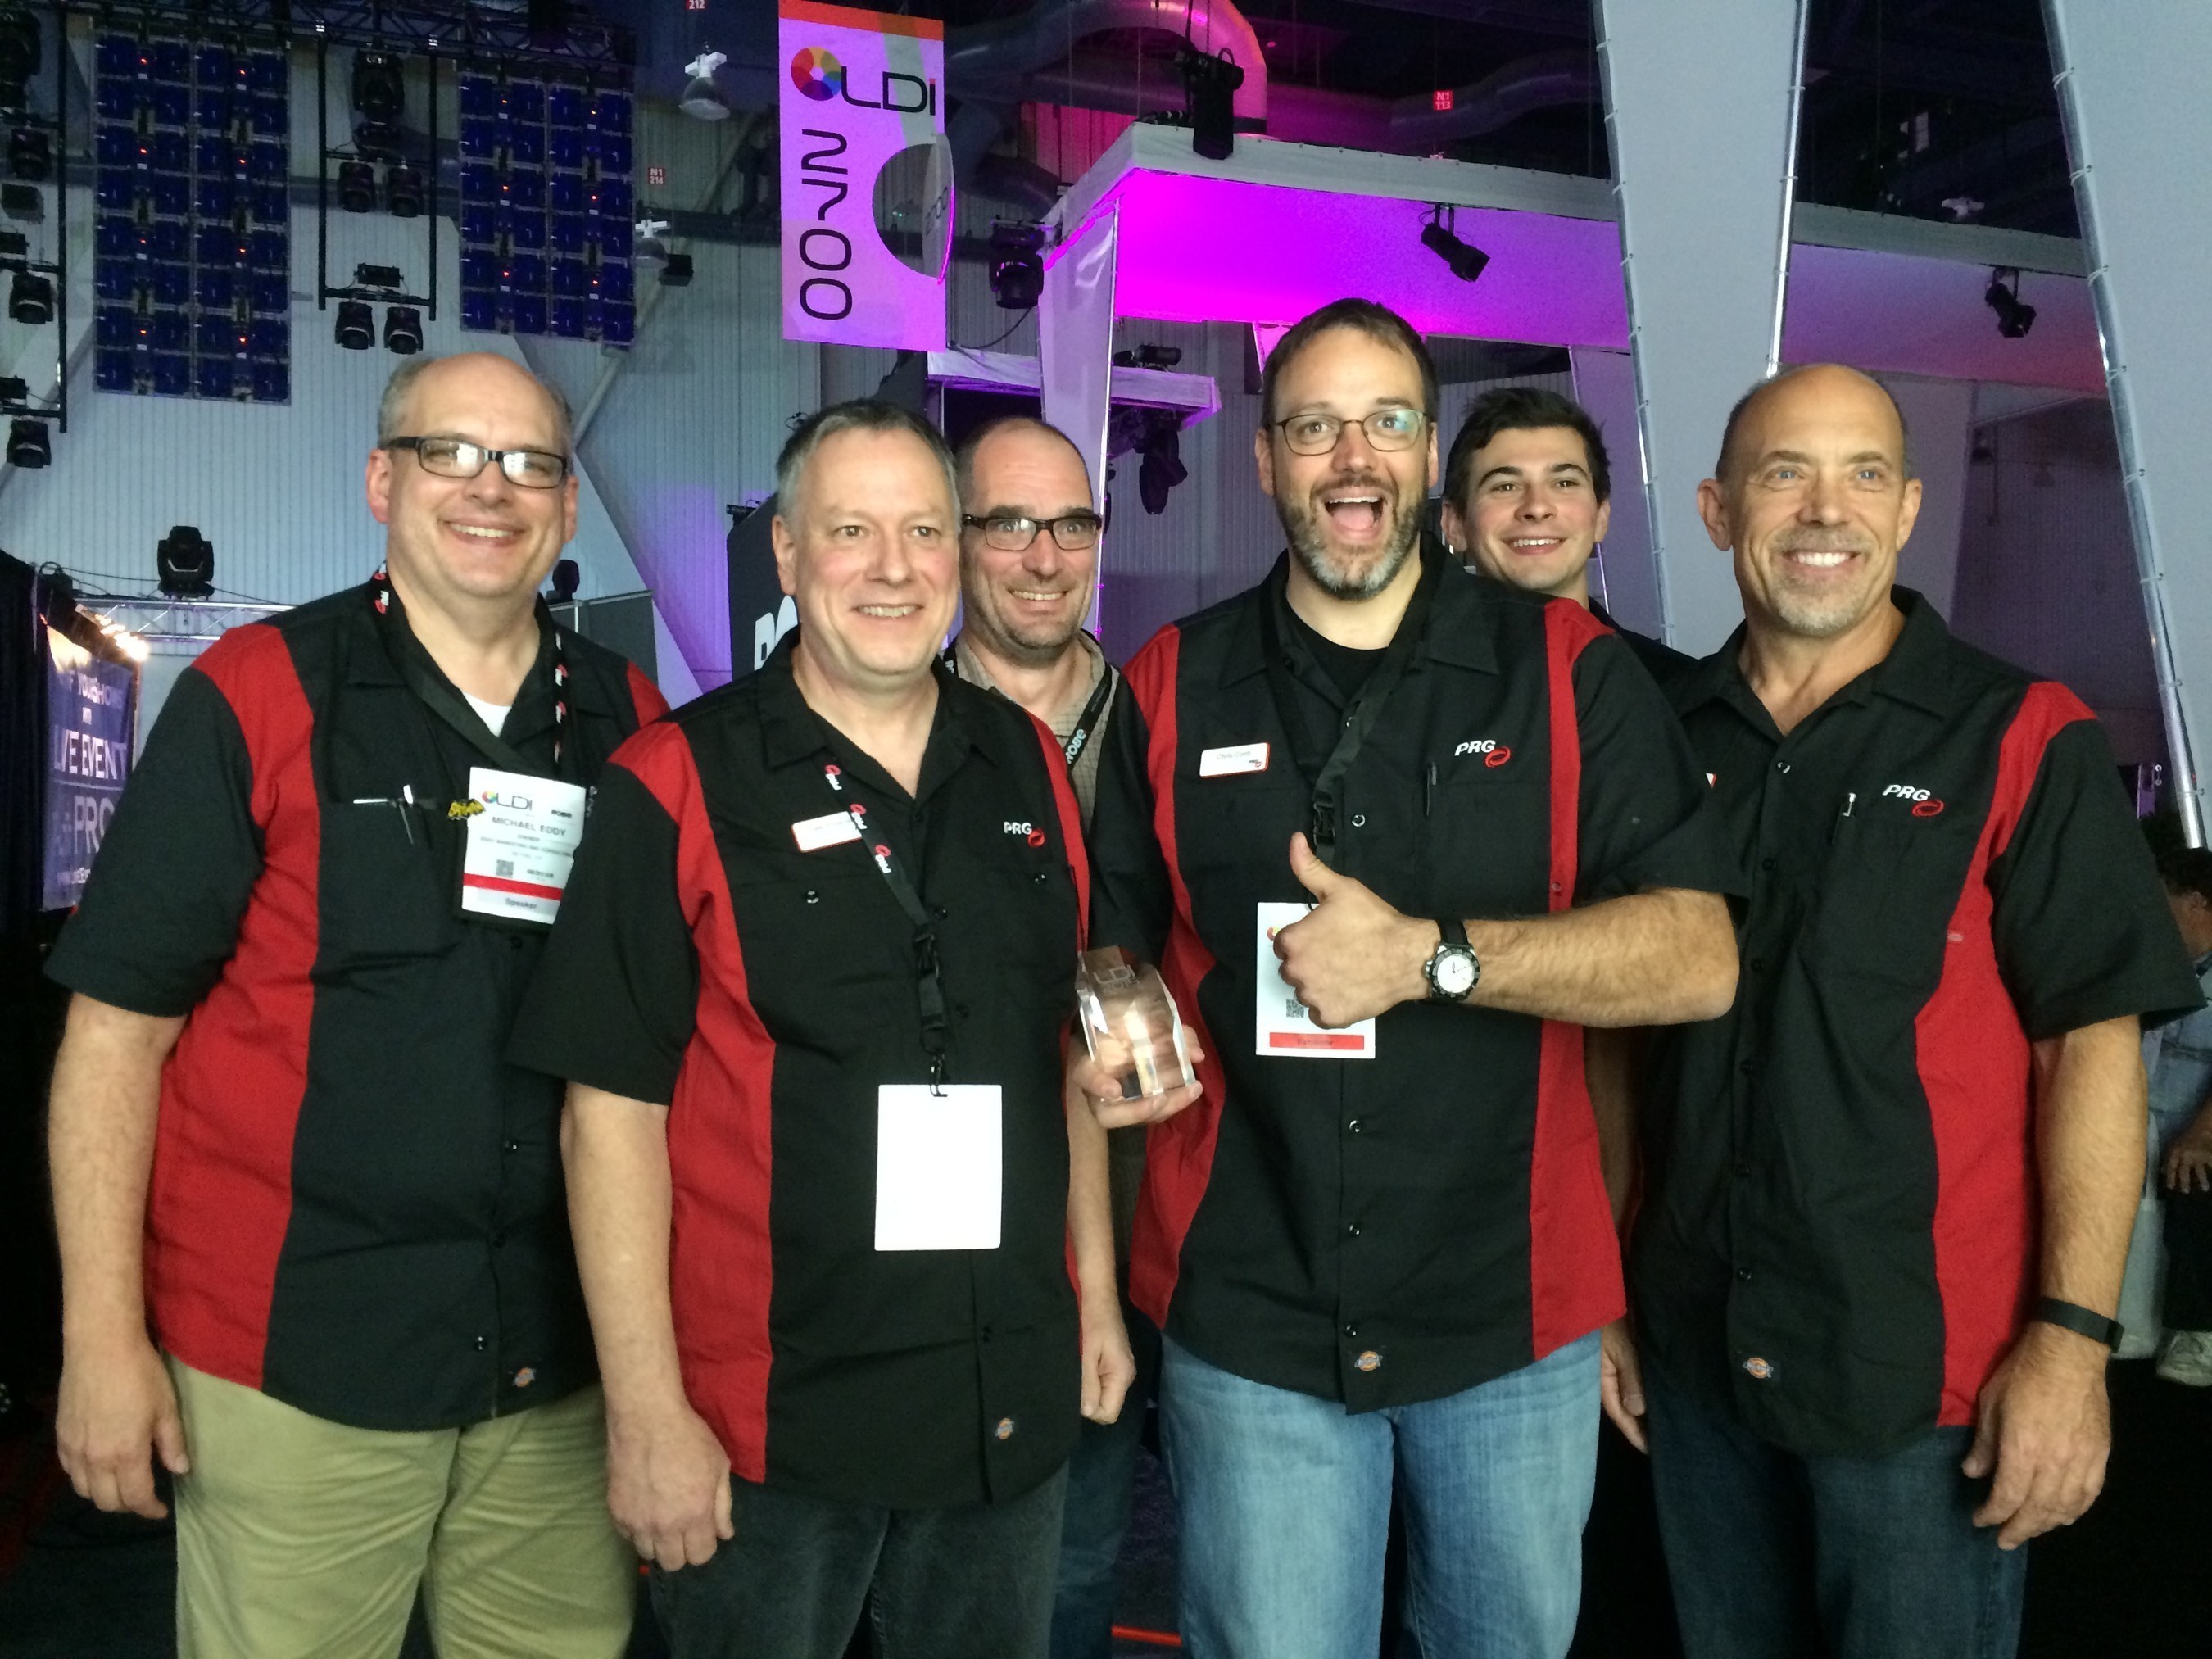 The PRG team with their LDI 2015 Best Debuting Product Award for the PRG GroundControl Followspot System.